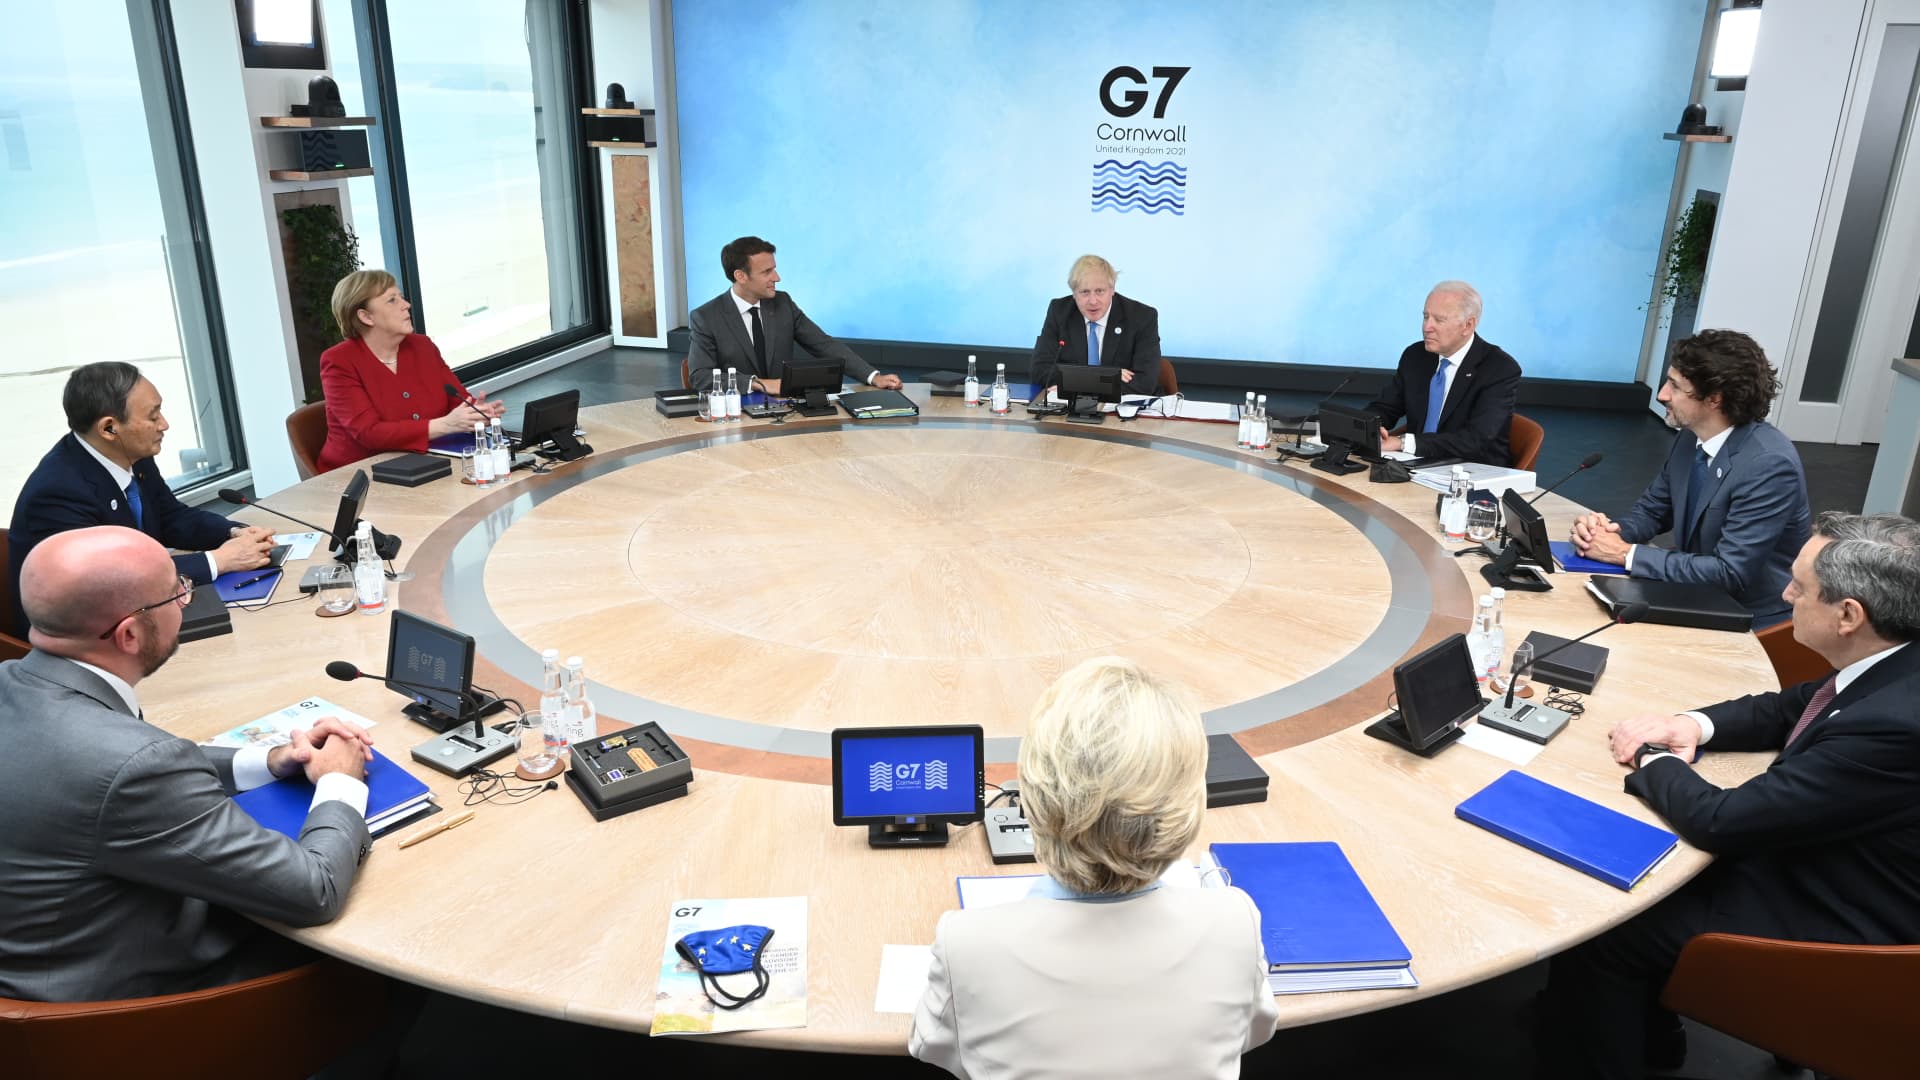 (Clockwise from Top C) British Prime Minister Boris Johnson, U.S. President Joe Biden, Canadian Prime Minister Justin Trudeau, Italian Prime Minister Mario Draghi, President of the European Commission Ursula von der Leyen, President of the European Council Charles Michel, Japanese Prime Minister Yoshihide Suga, German Chancellor Angela Merkel and French President Emmanuel Macron, sit around the table at the top of the G7 meeting in Carbis Bay, on June 11, 2021 in Carbis Bay, Cornwall.